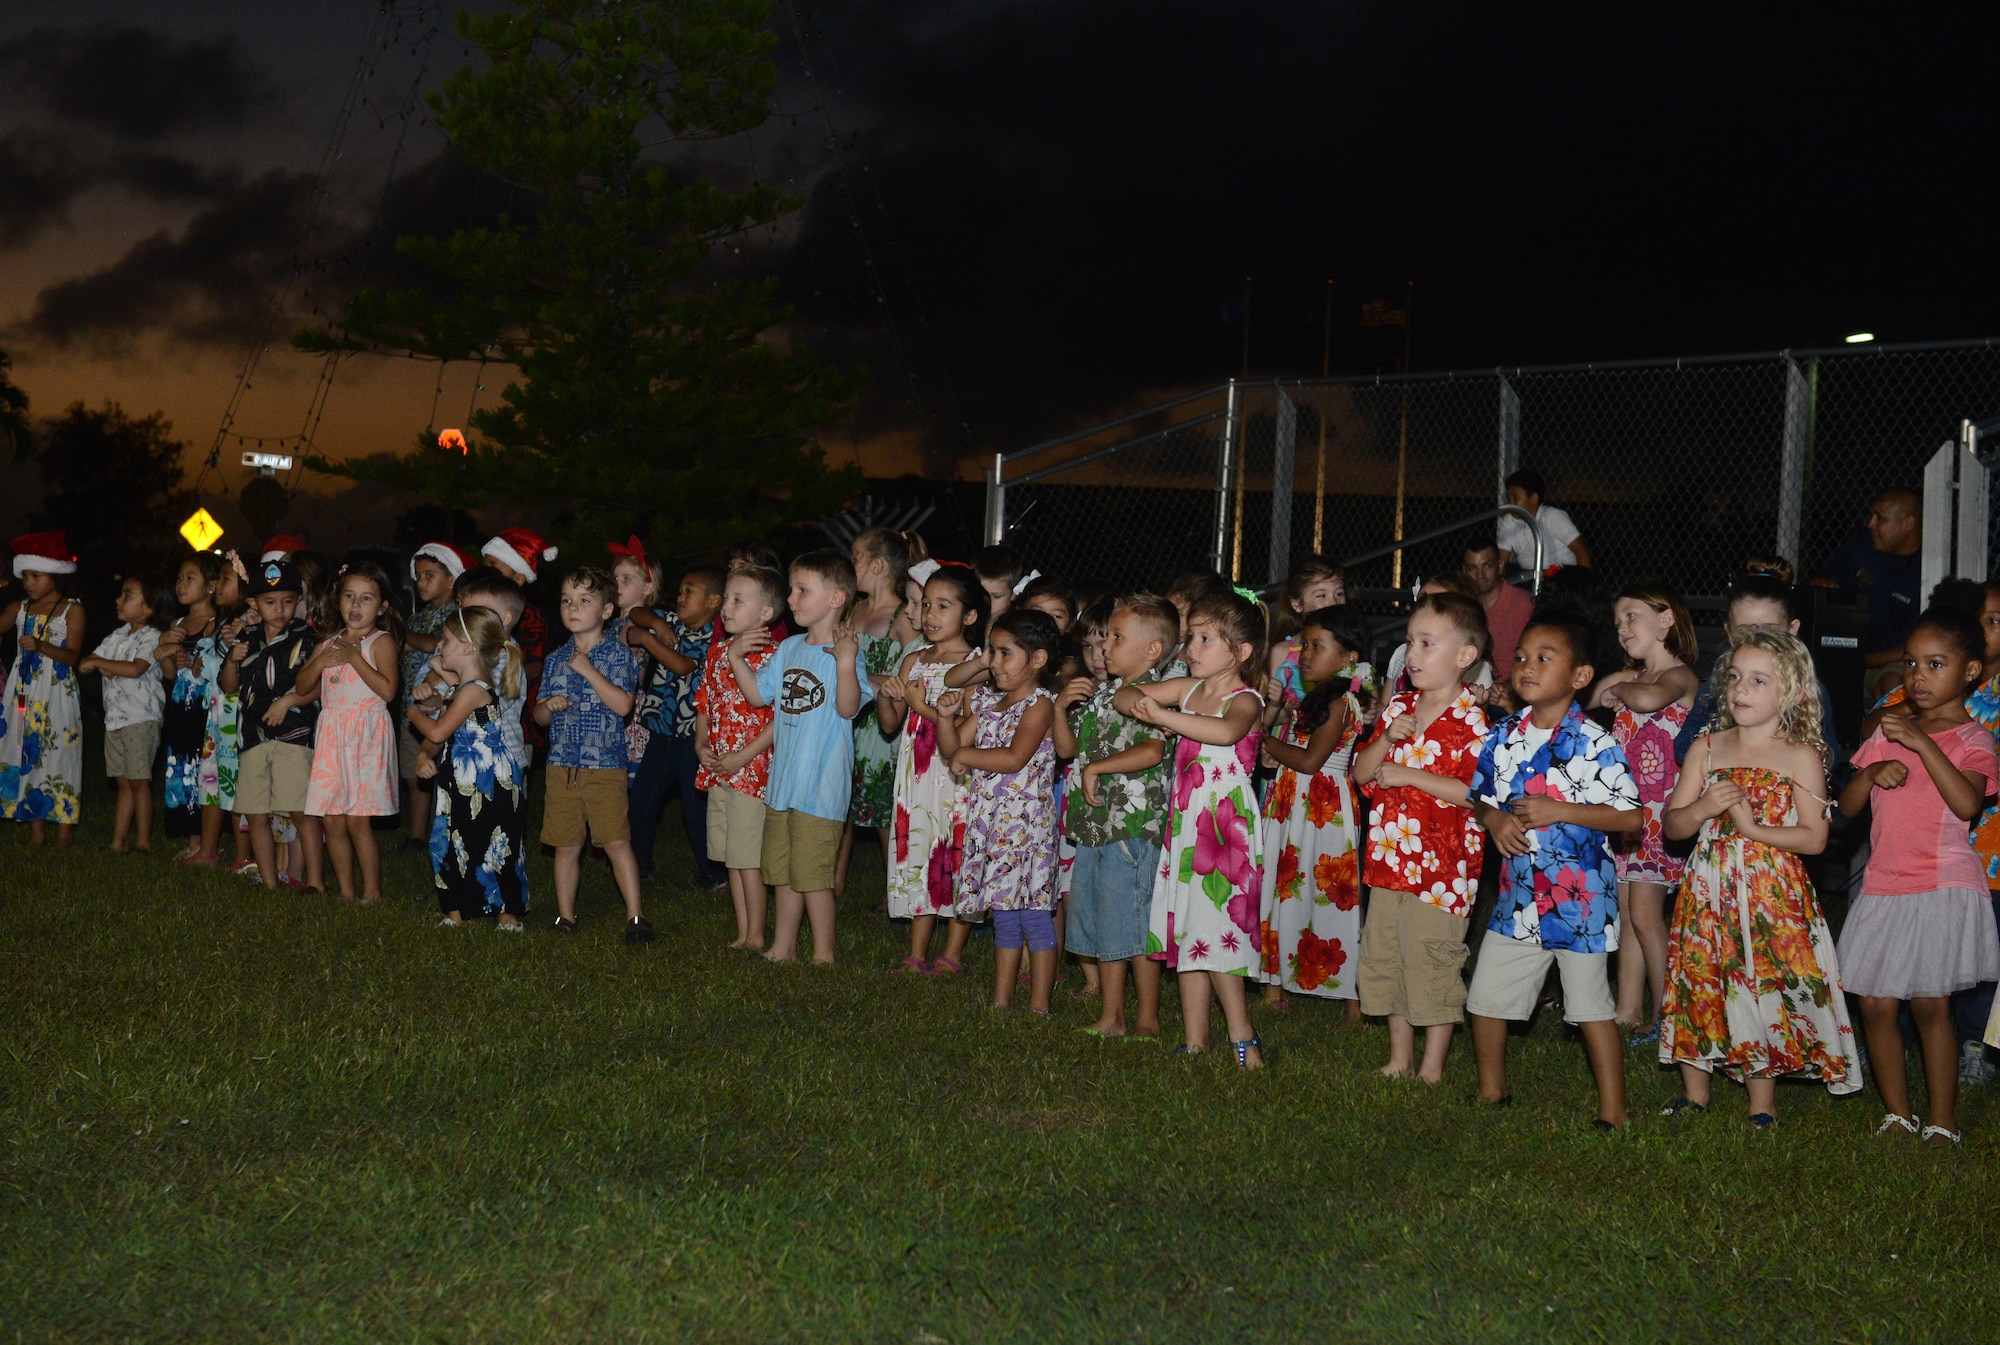 Andersen Elementary School children sing holiday songs at the tree lighting ceremony Dec. 1, 2015, at Andersen Air Force Base, Guam. Approximately 300 people attended the ceremony in celebration of the holiday season. (U.S. Air Force photo by Airman 1st Class Arielle Vasquez/Released)